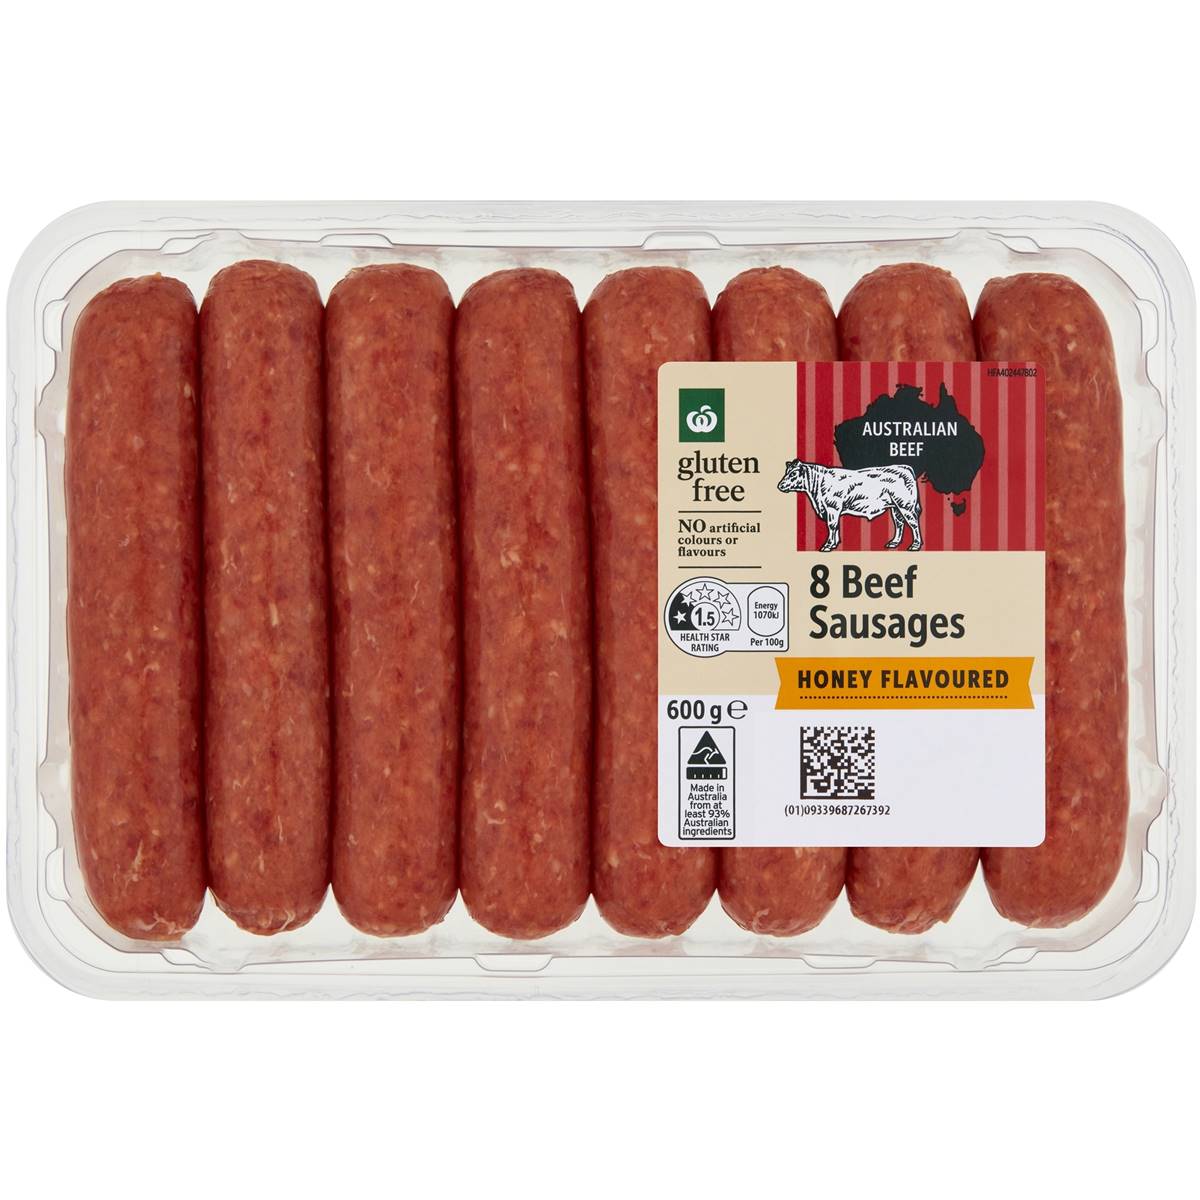 Calories in Woolworths 8 Beef Sausages Honey Flavoured